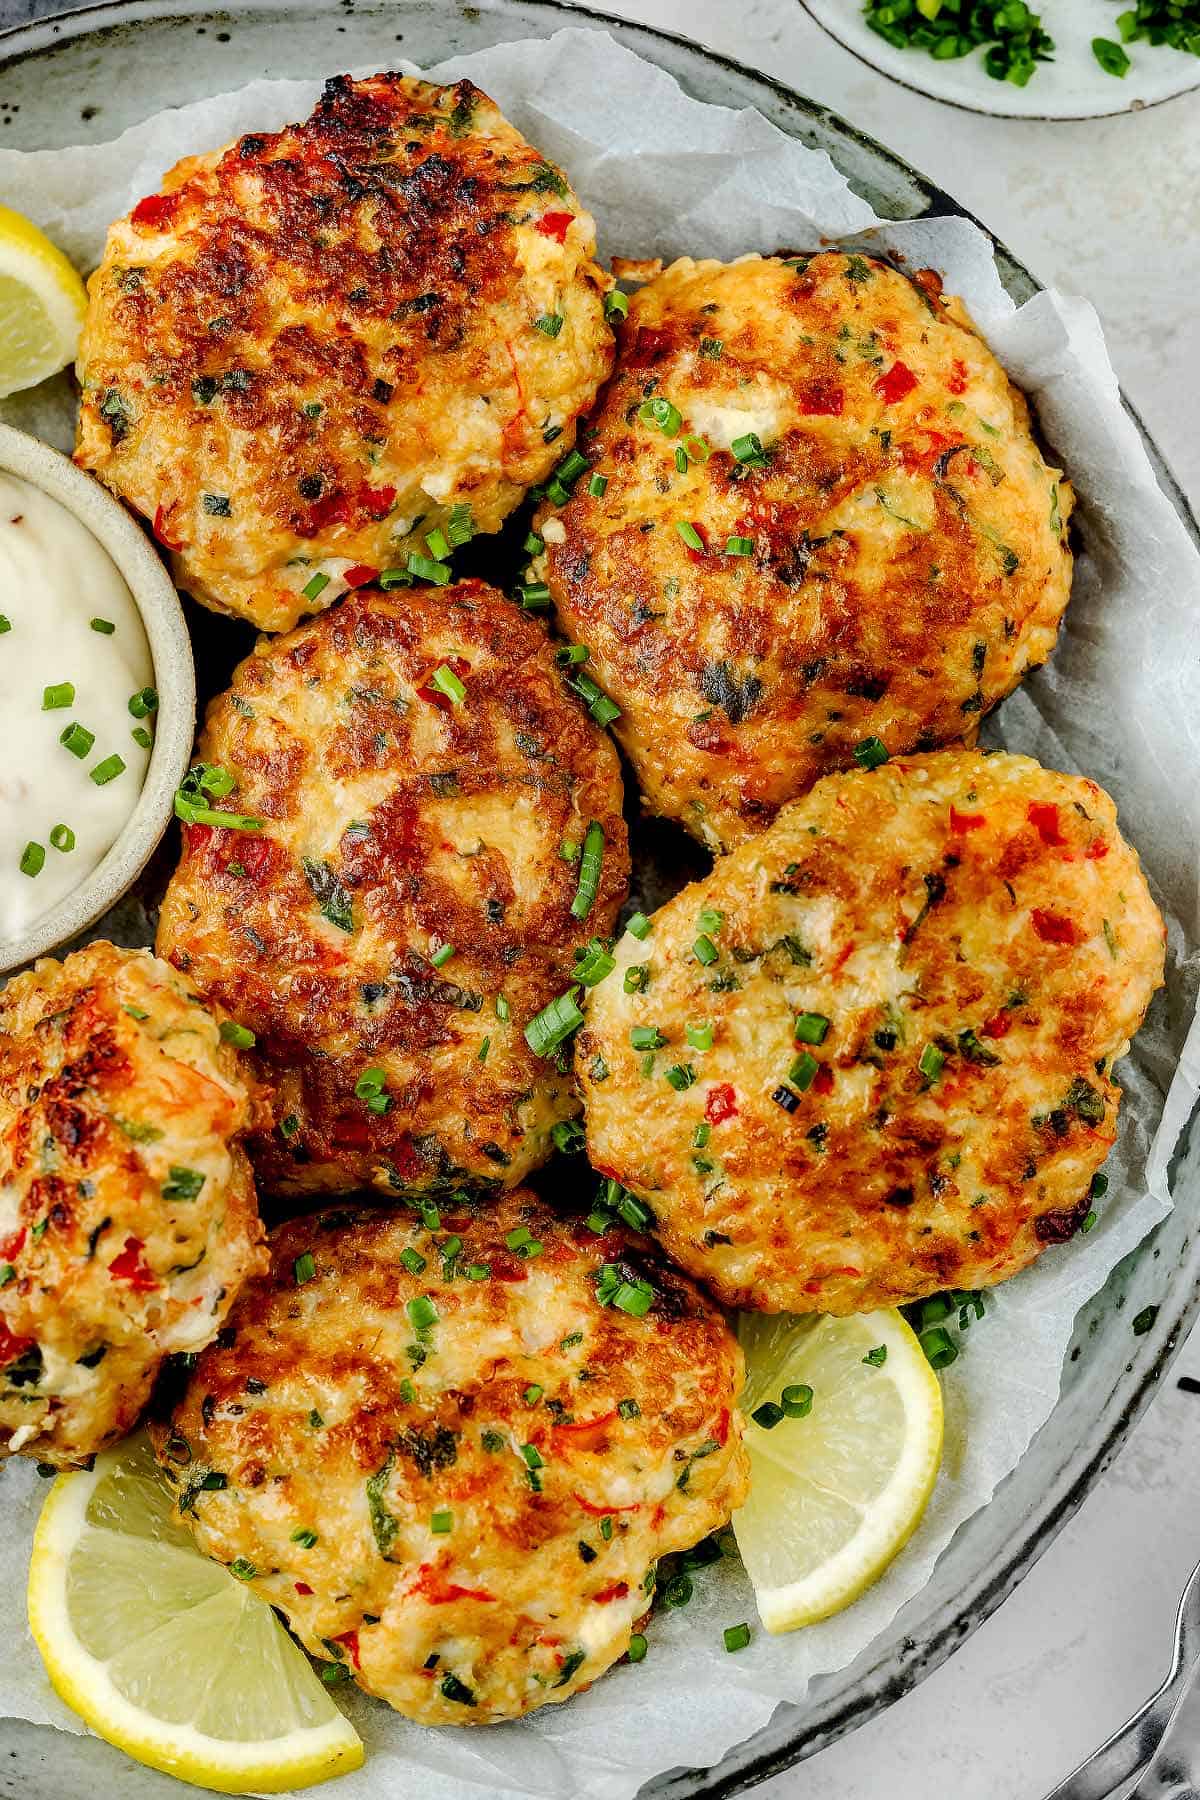 Savory shrimp cakes arranged on a plate, garnished with lemon slices and served with zesty lime-chili mayo.